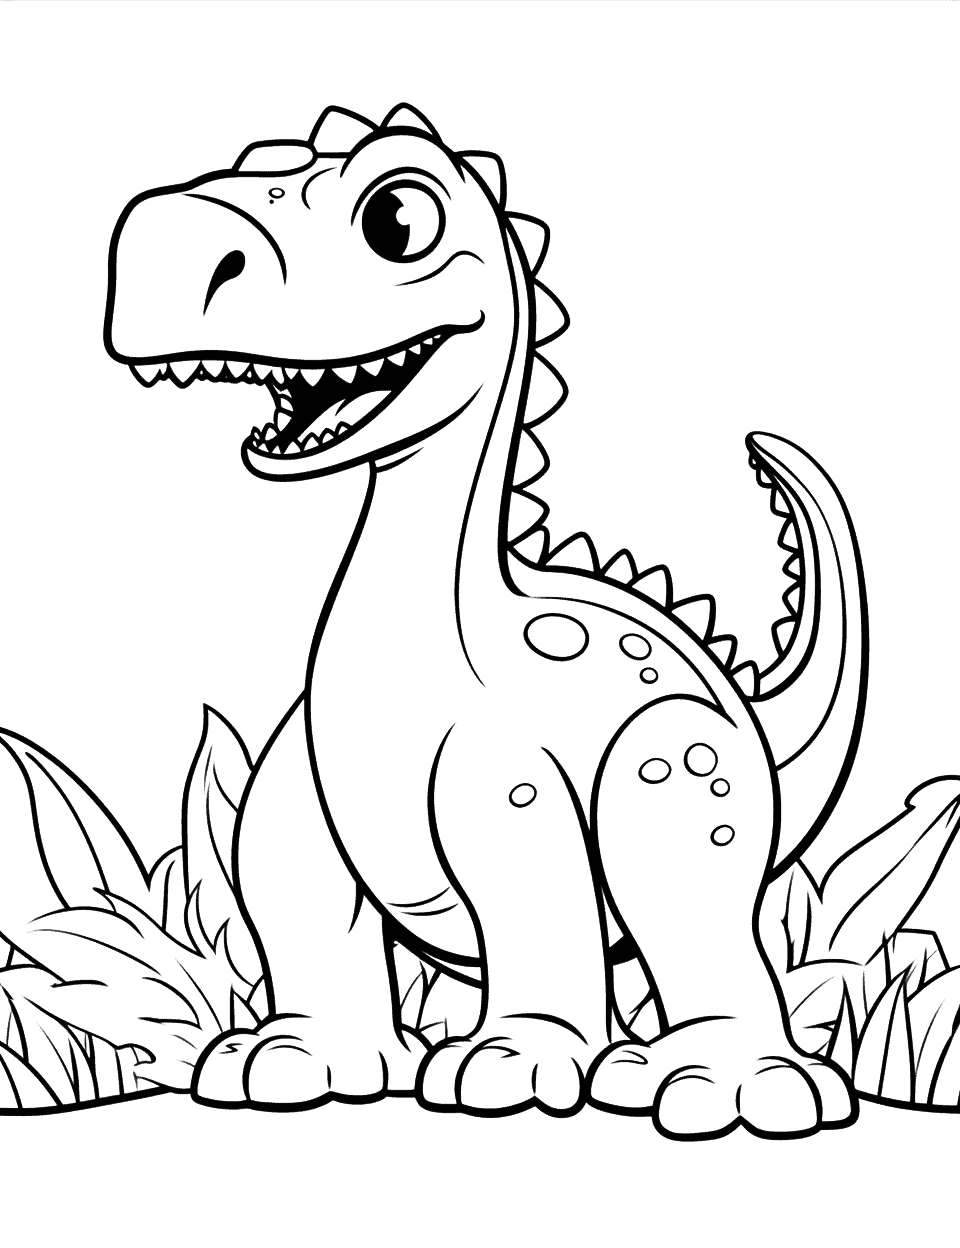 Simple Dinosaur Outline Coloring Page - Simple, easy to color outline of a dinosaur.